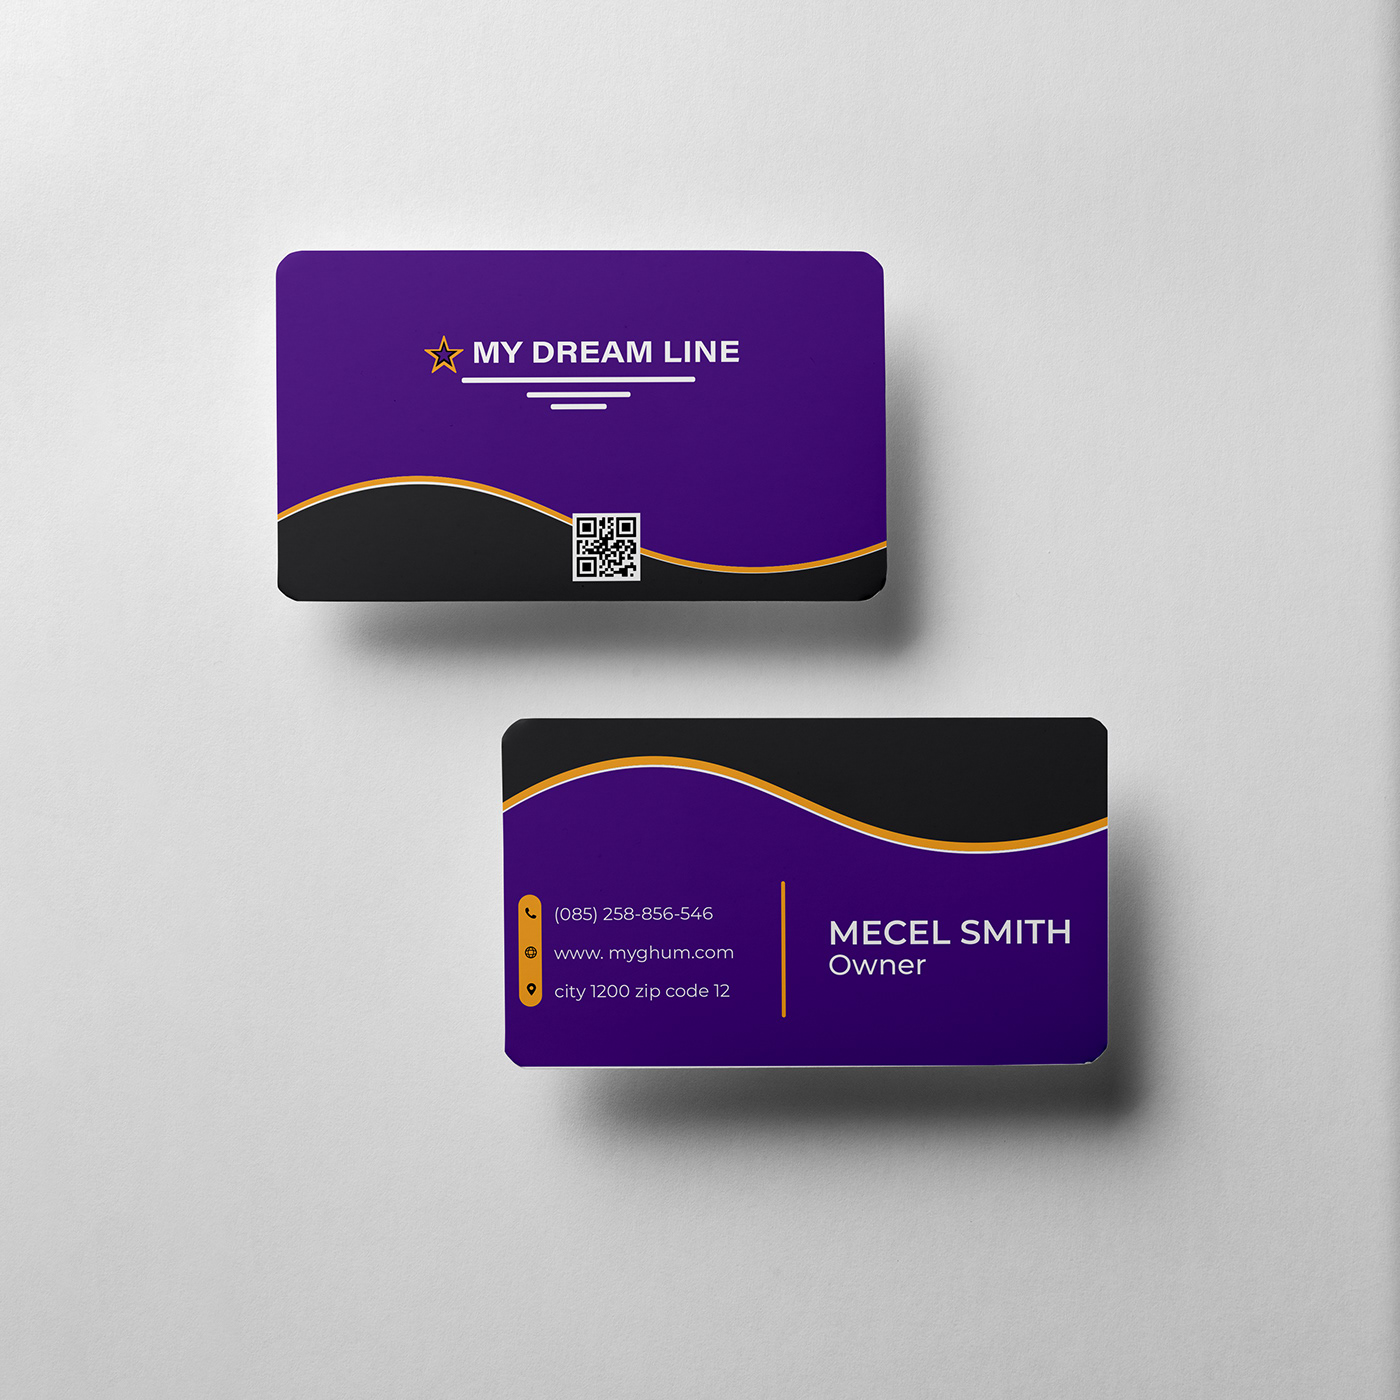 company card business card business name card company business card card template visiting card Business card template card visit graphic Investment